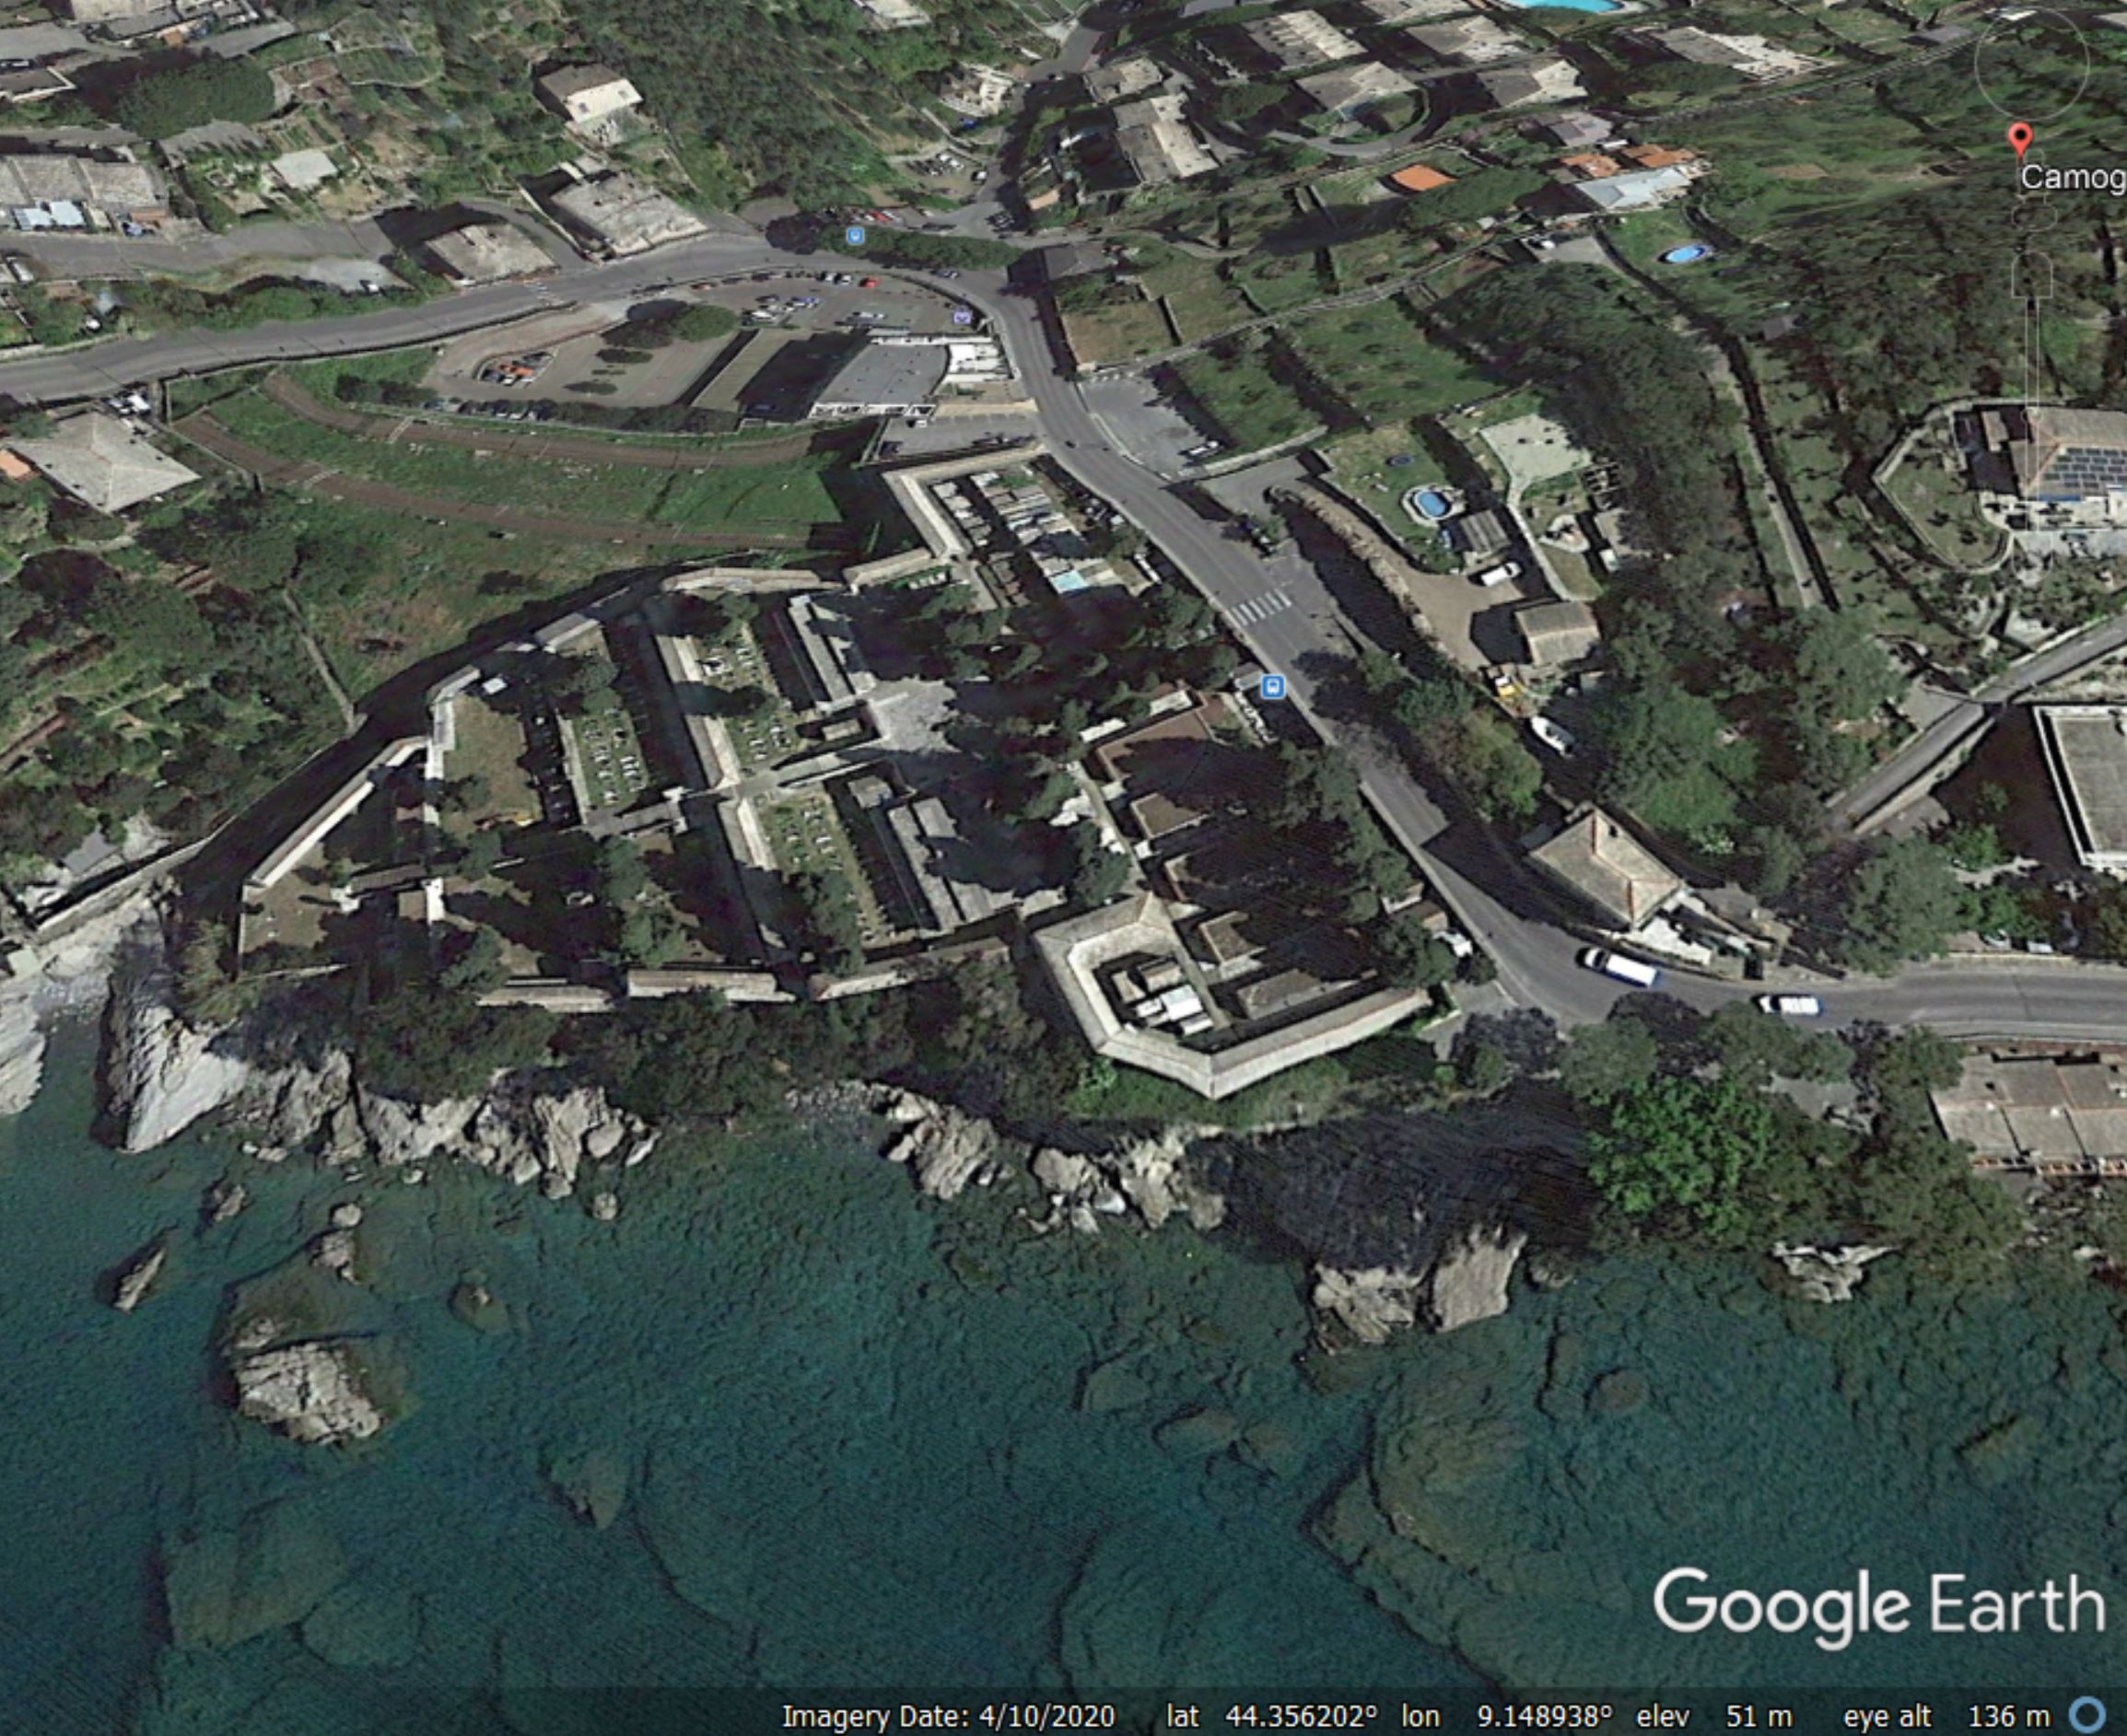 Google Earth image of the site of the landslide at Camogli